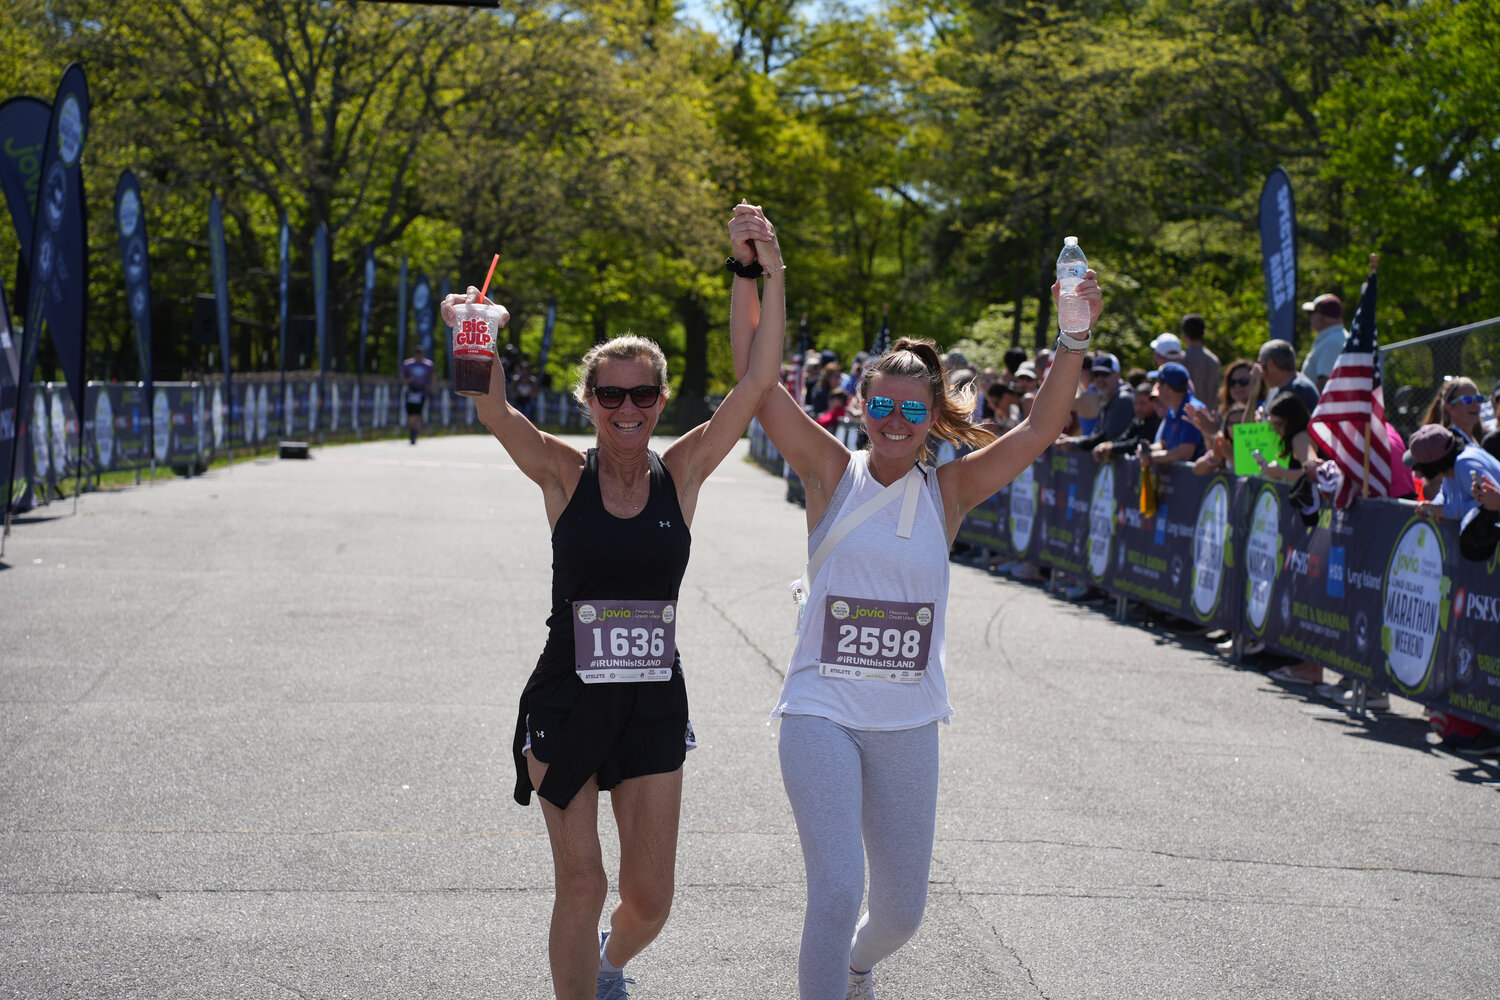 East Meadow residents Janet Franzese, 59, and her daughter, Amanda Franzese, 26, crossed the half marathon finish line together.